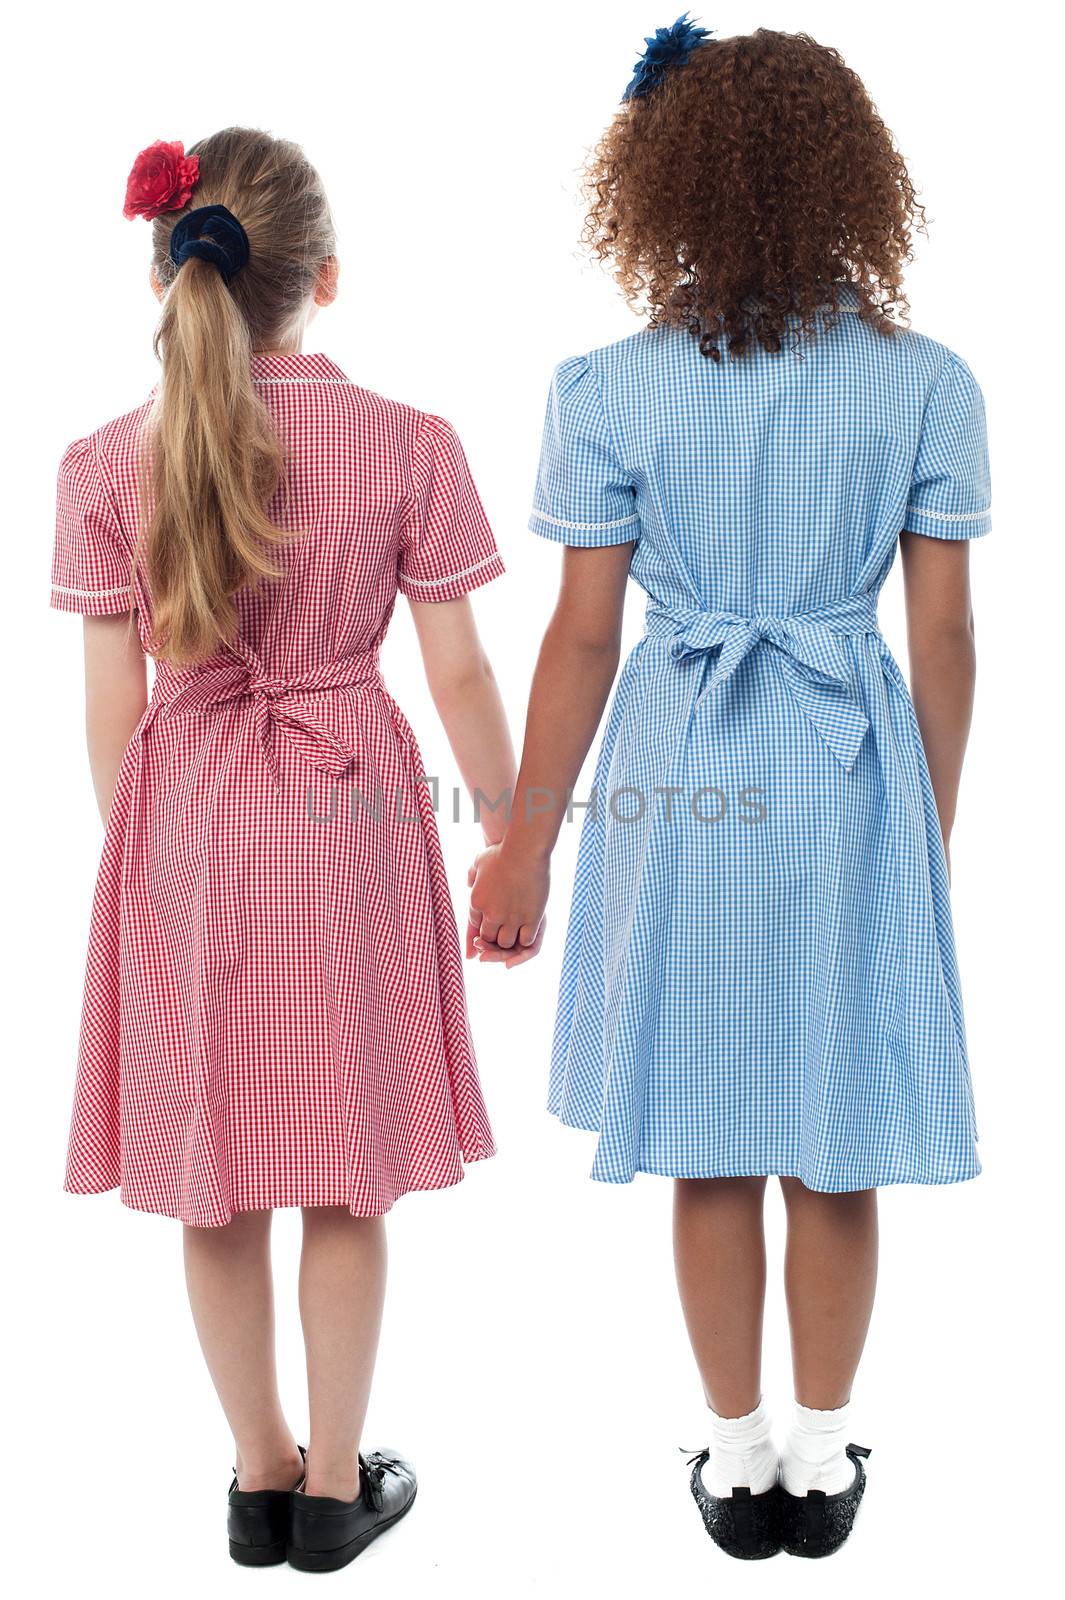 Girls in school uniform facing the wall by stockyimages